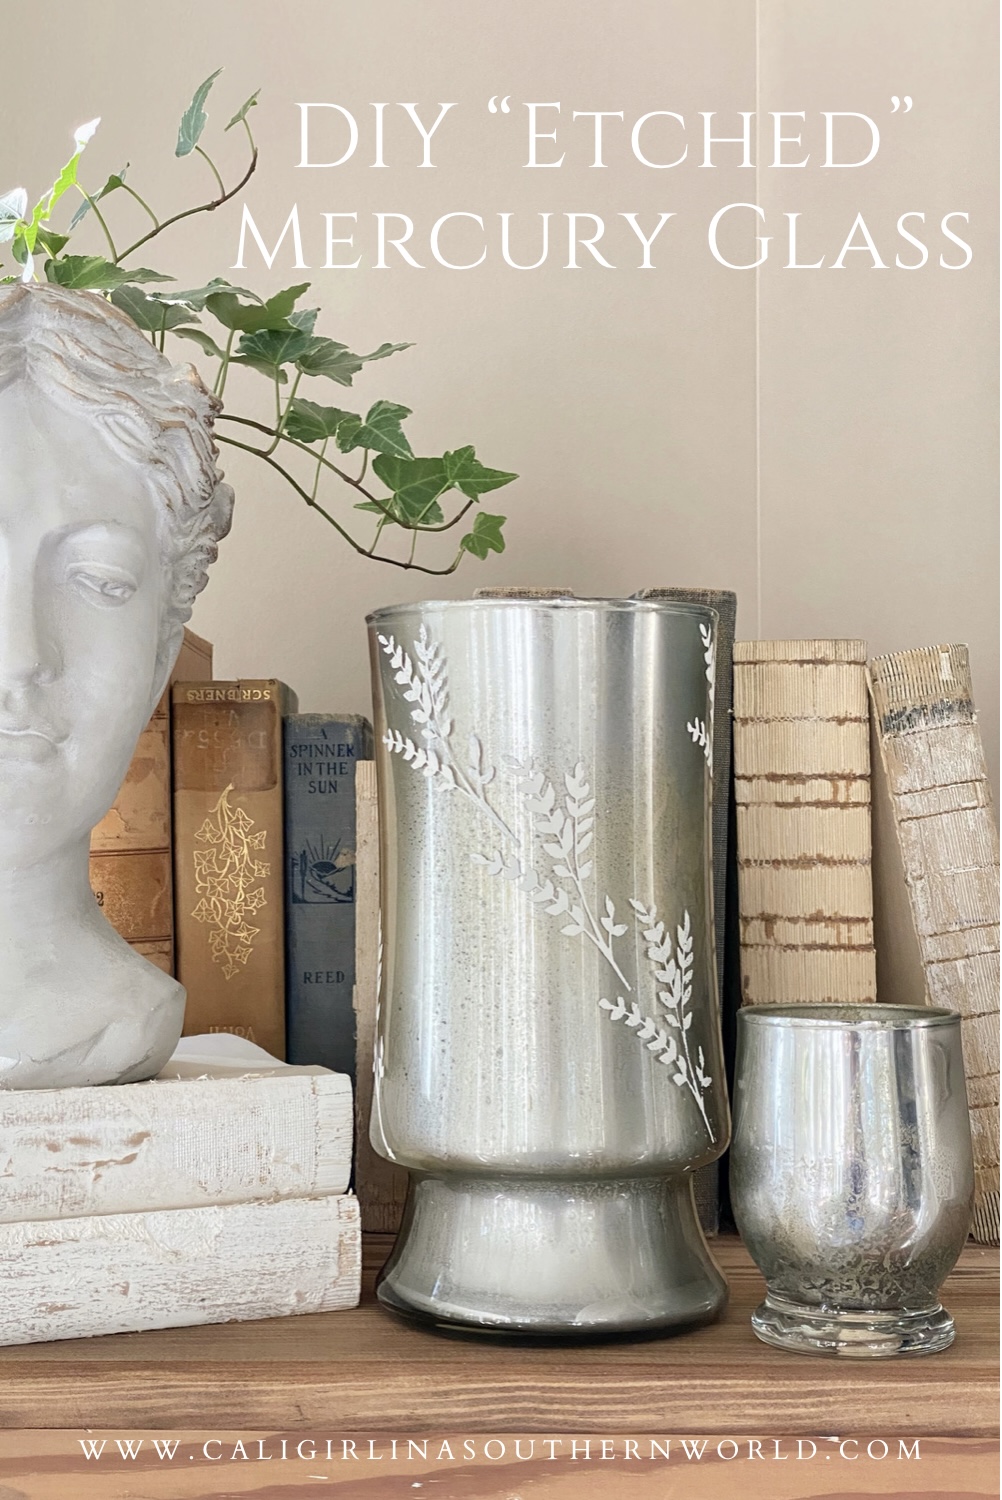 Pinterest Pin for DIY mercury glass candle holders with faux etching.